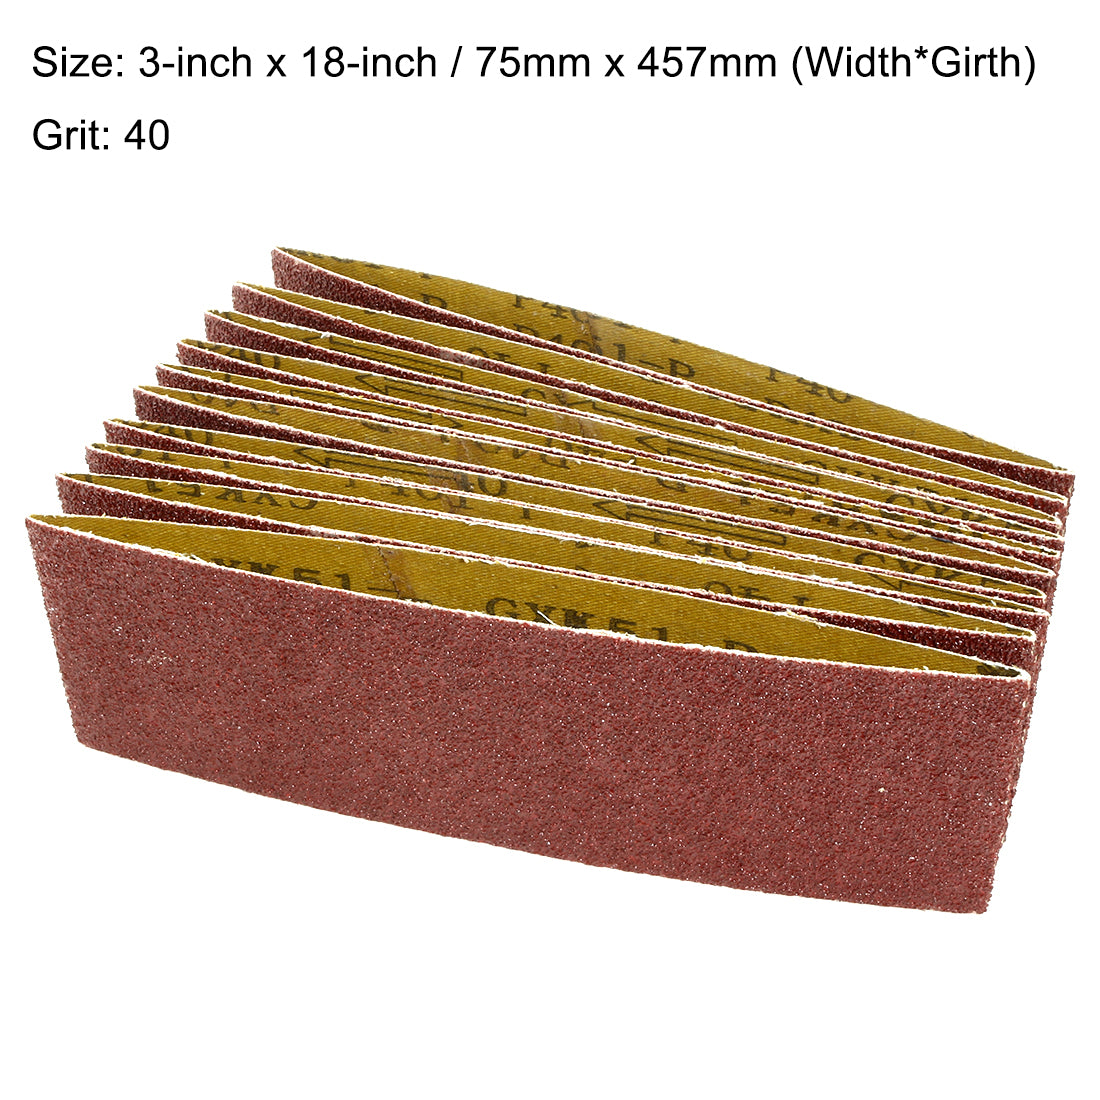 uxcell Uxcell 3-Inch x 18-Inch Aluminum Oxide Sanding Belt 40 Grits Lapped Joint 10pcs